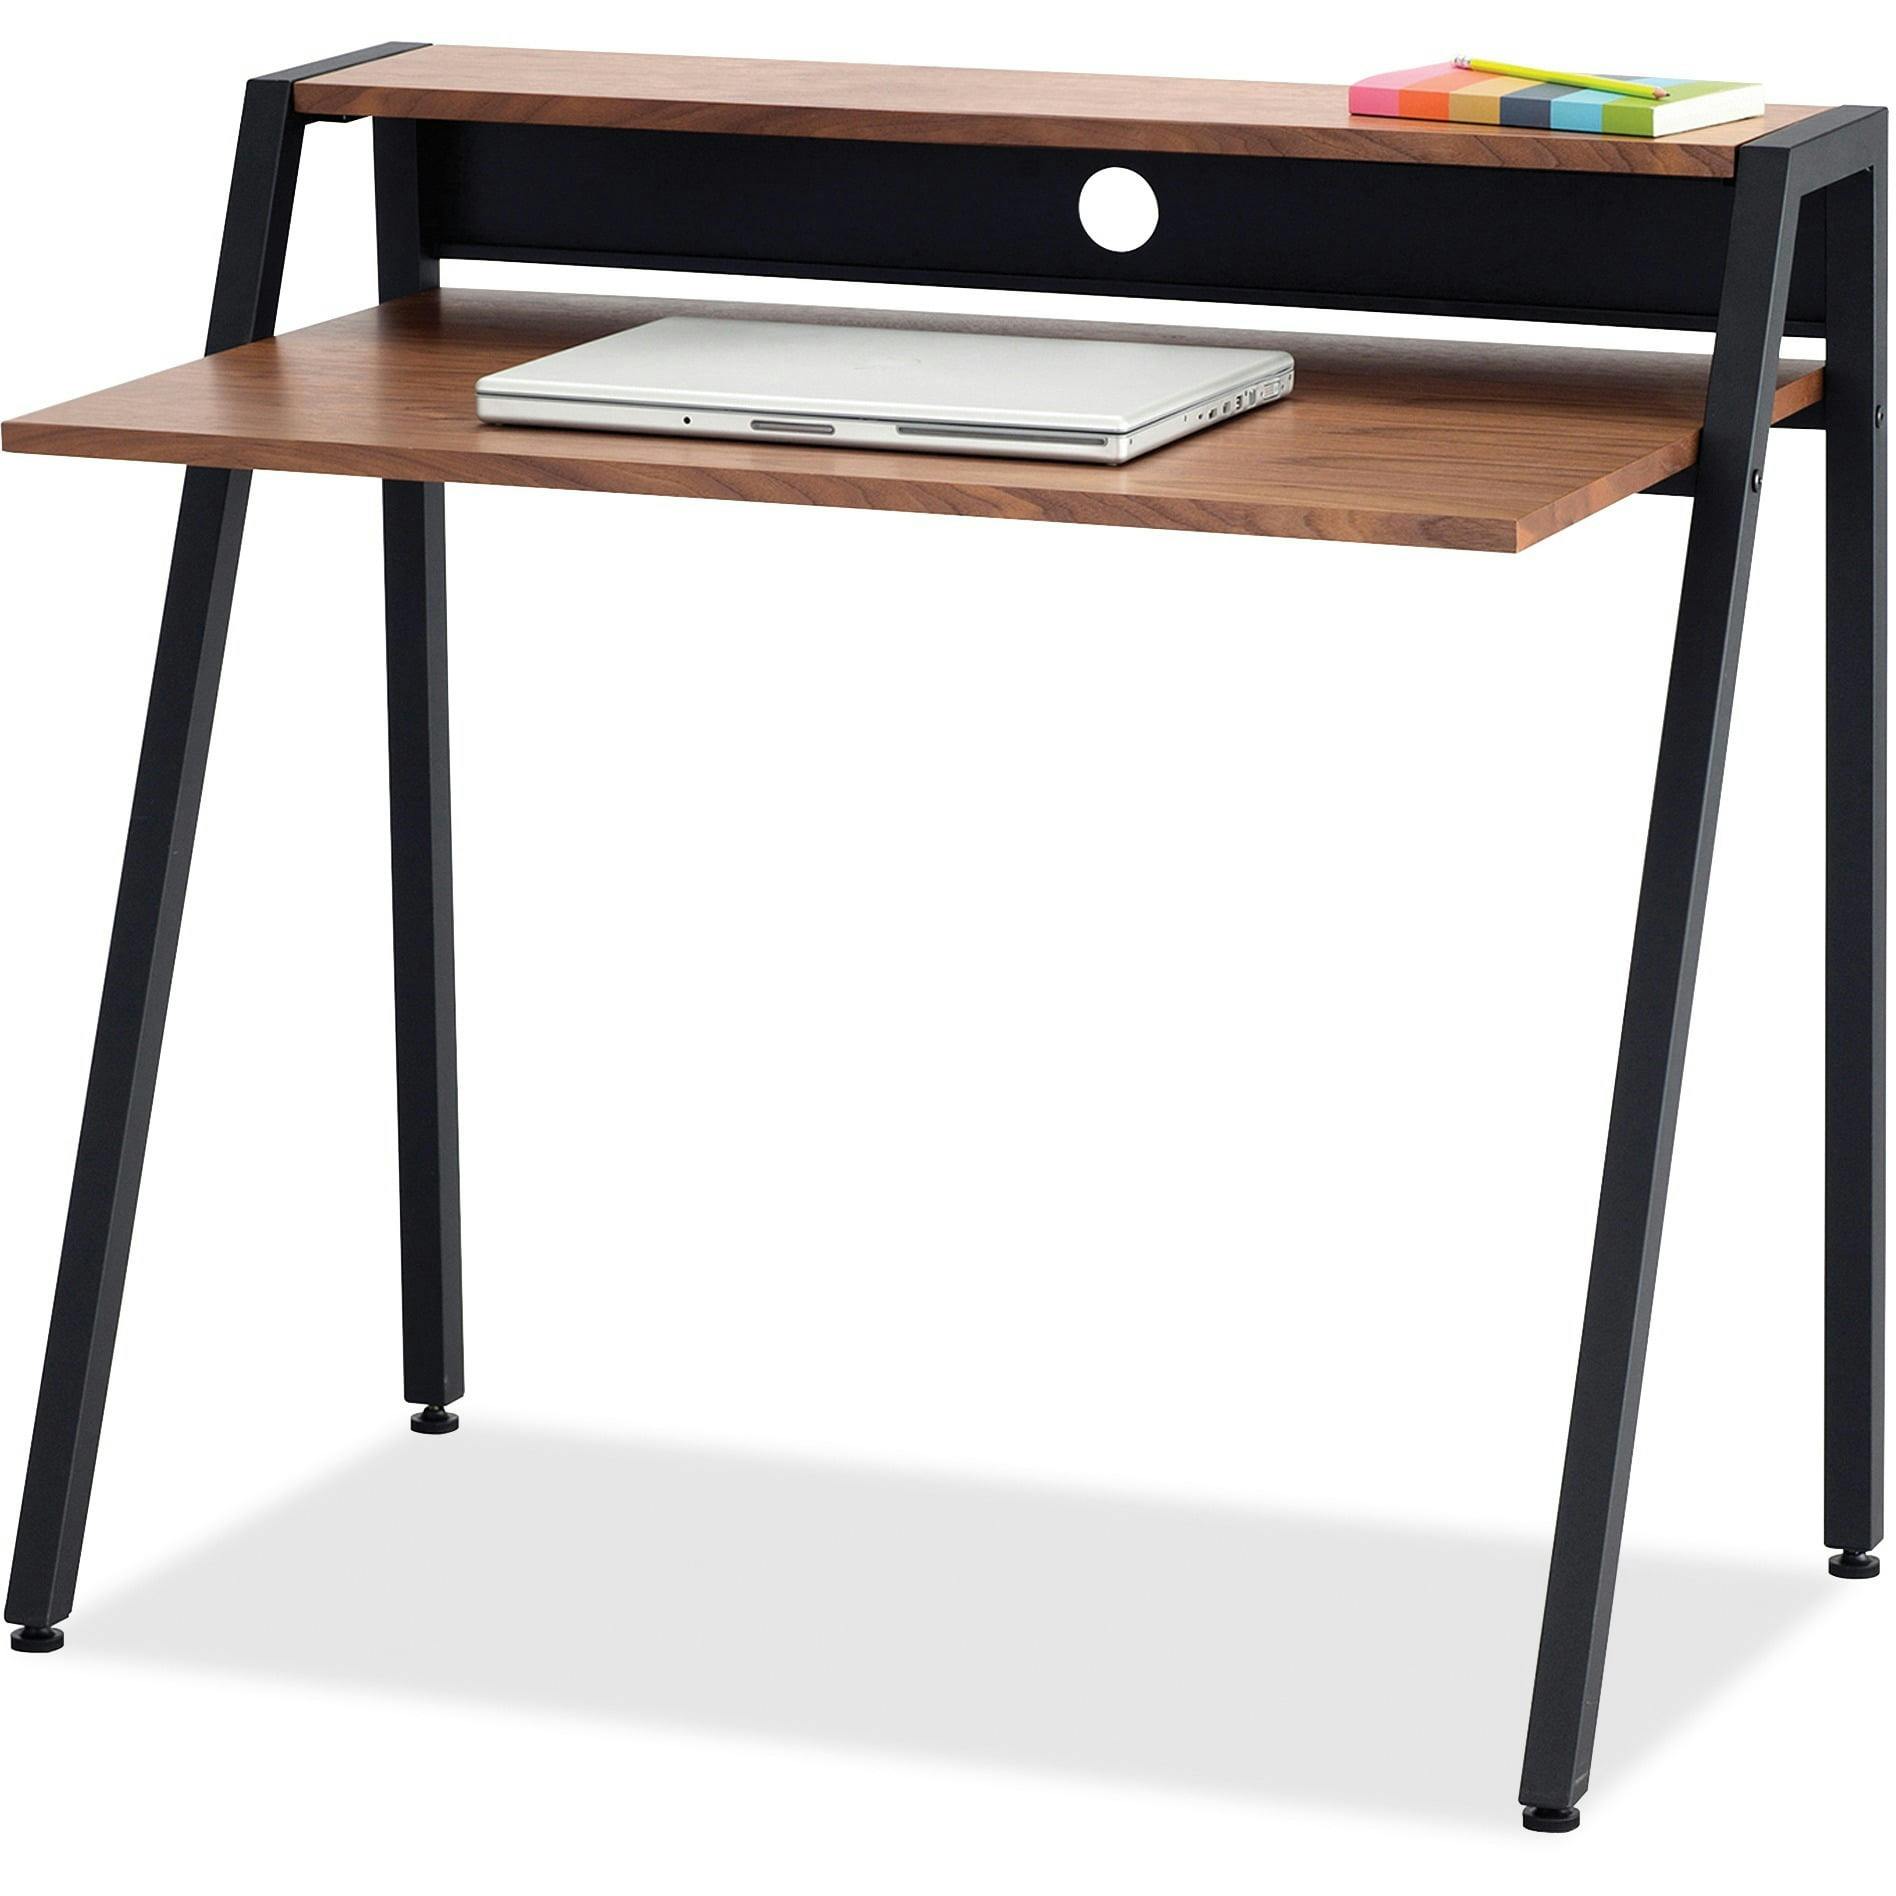 Safco Compact Black Wood Writing Desk with Dual-Level Workspace